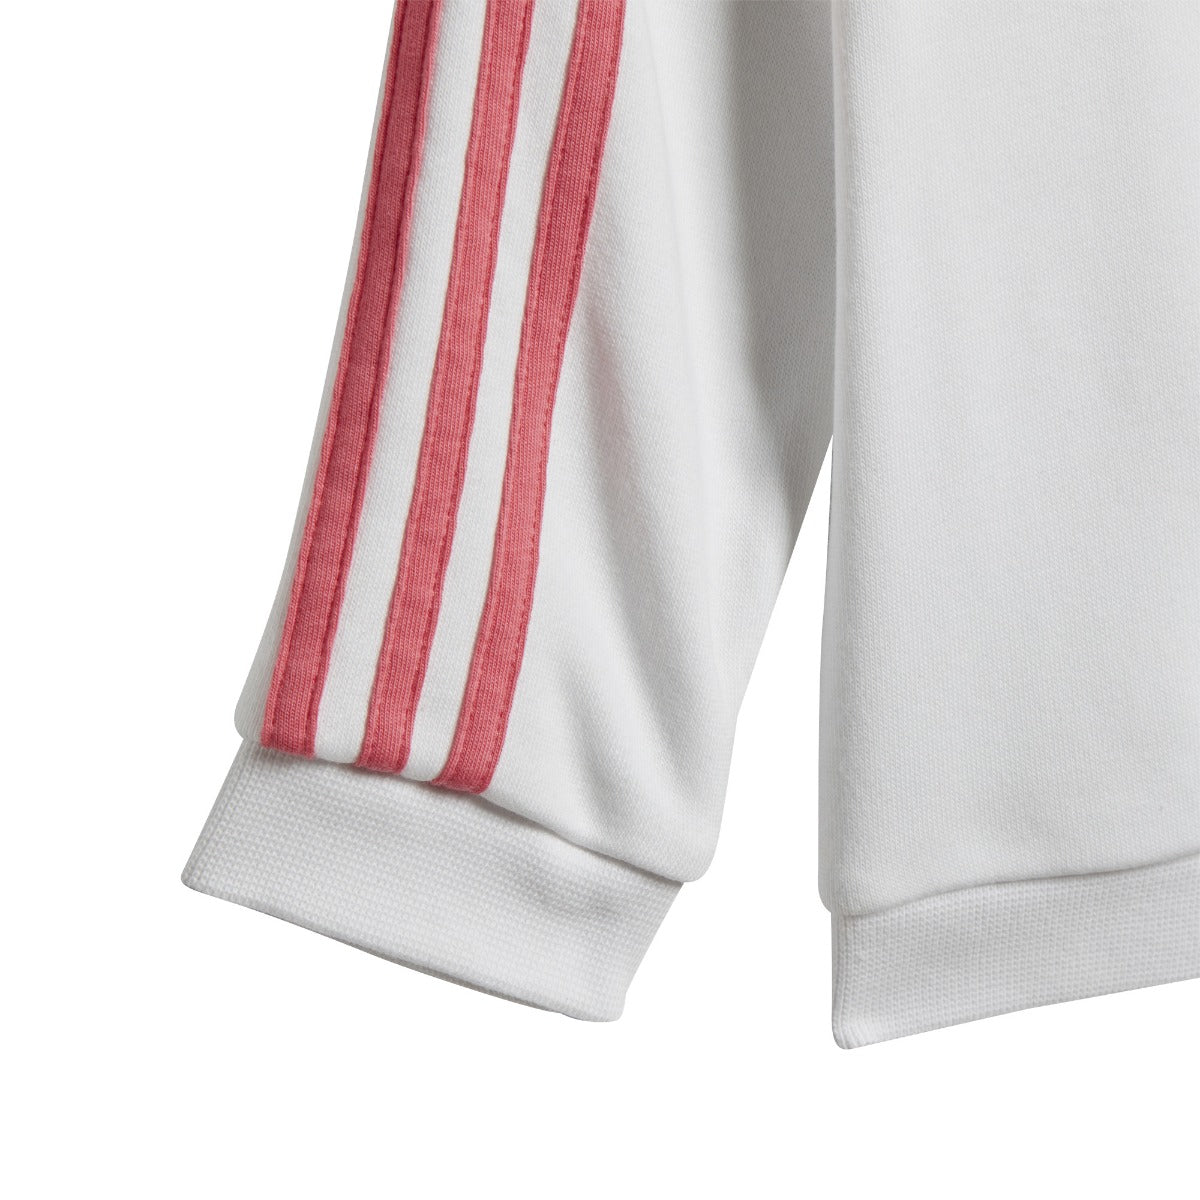 Adidas 2020-21 Real Madrid 3 Stripes Baby Jogger - White-Navy-Pink